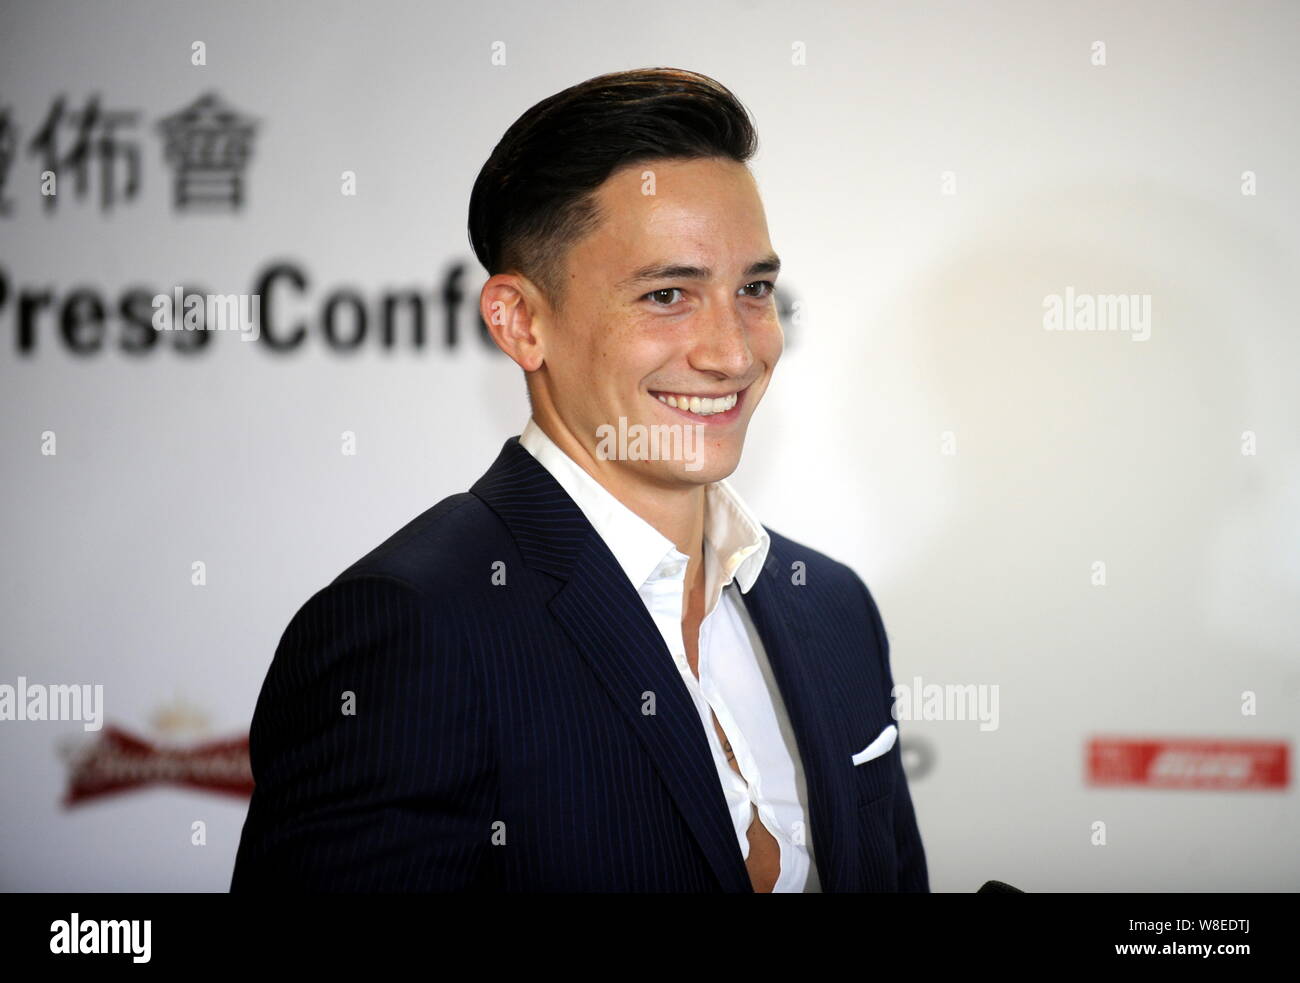 German gymnast Marcel Nguyen smiles during a press conference for the 2015 Porsche Carrera Cup Asia season in Hong Kong, China, 1 April 2015. Stock Photo